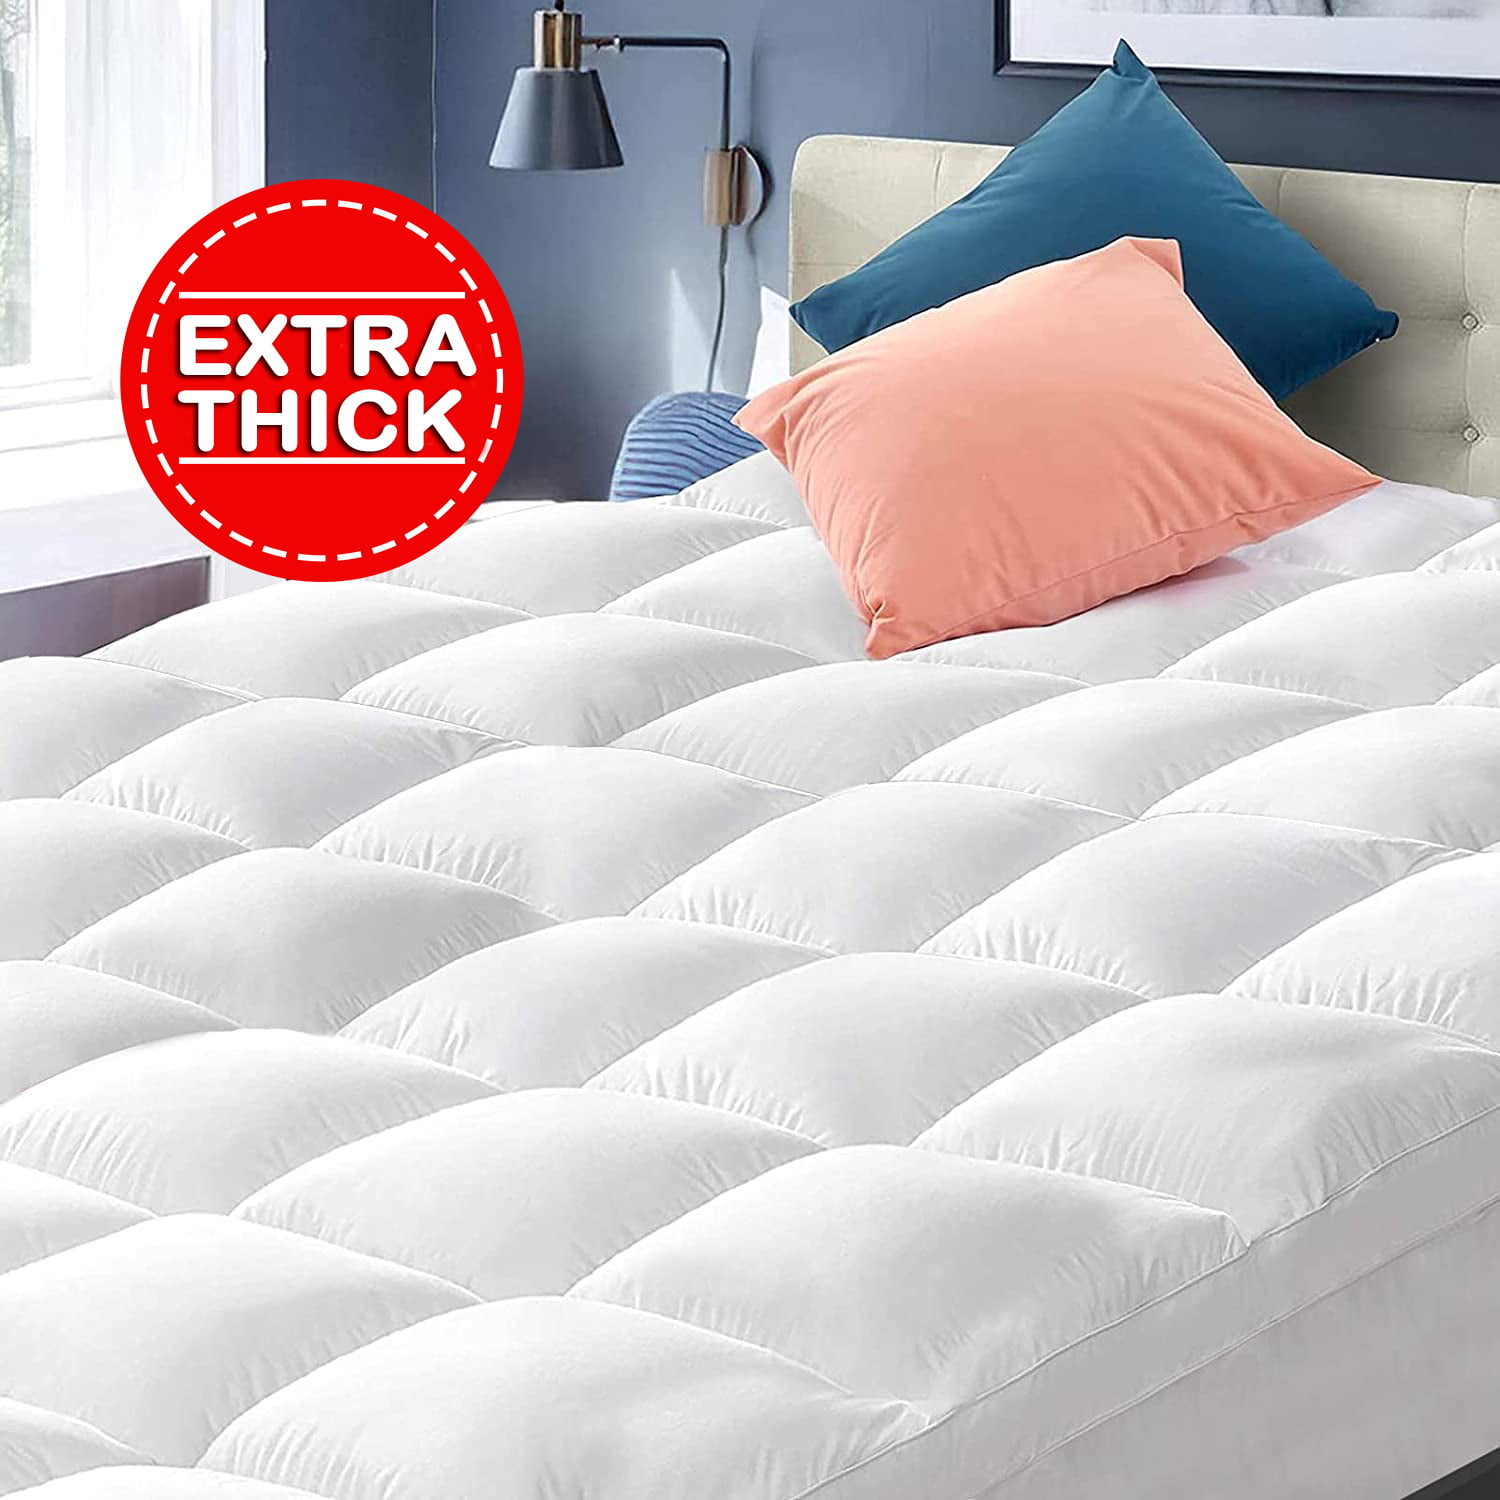 Details about   Extra Thick Cooling Mattress Topper Pad 400TC Cotton Top Plush Pillowtop Cover 